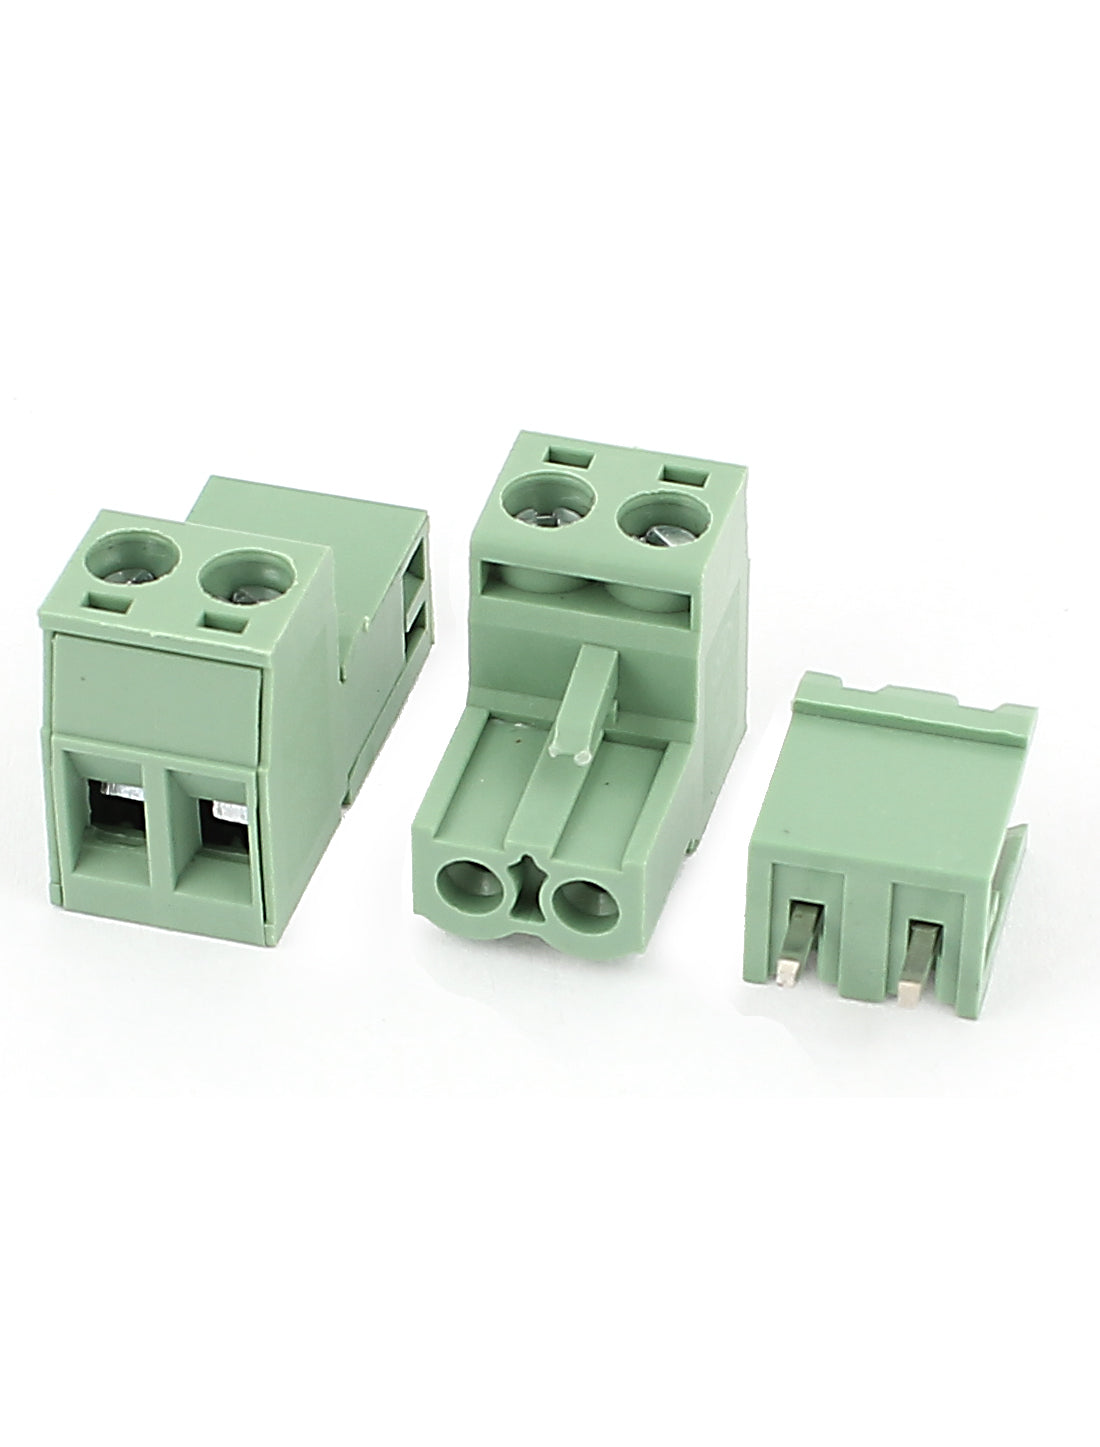 uxcell Uxcell 20 Sets AWG 12-24 300V 10A 5.08mm Pitch PCB Screw Terminal Block Connector Army Green